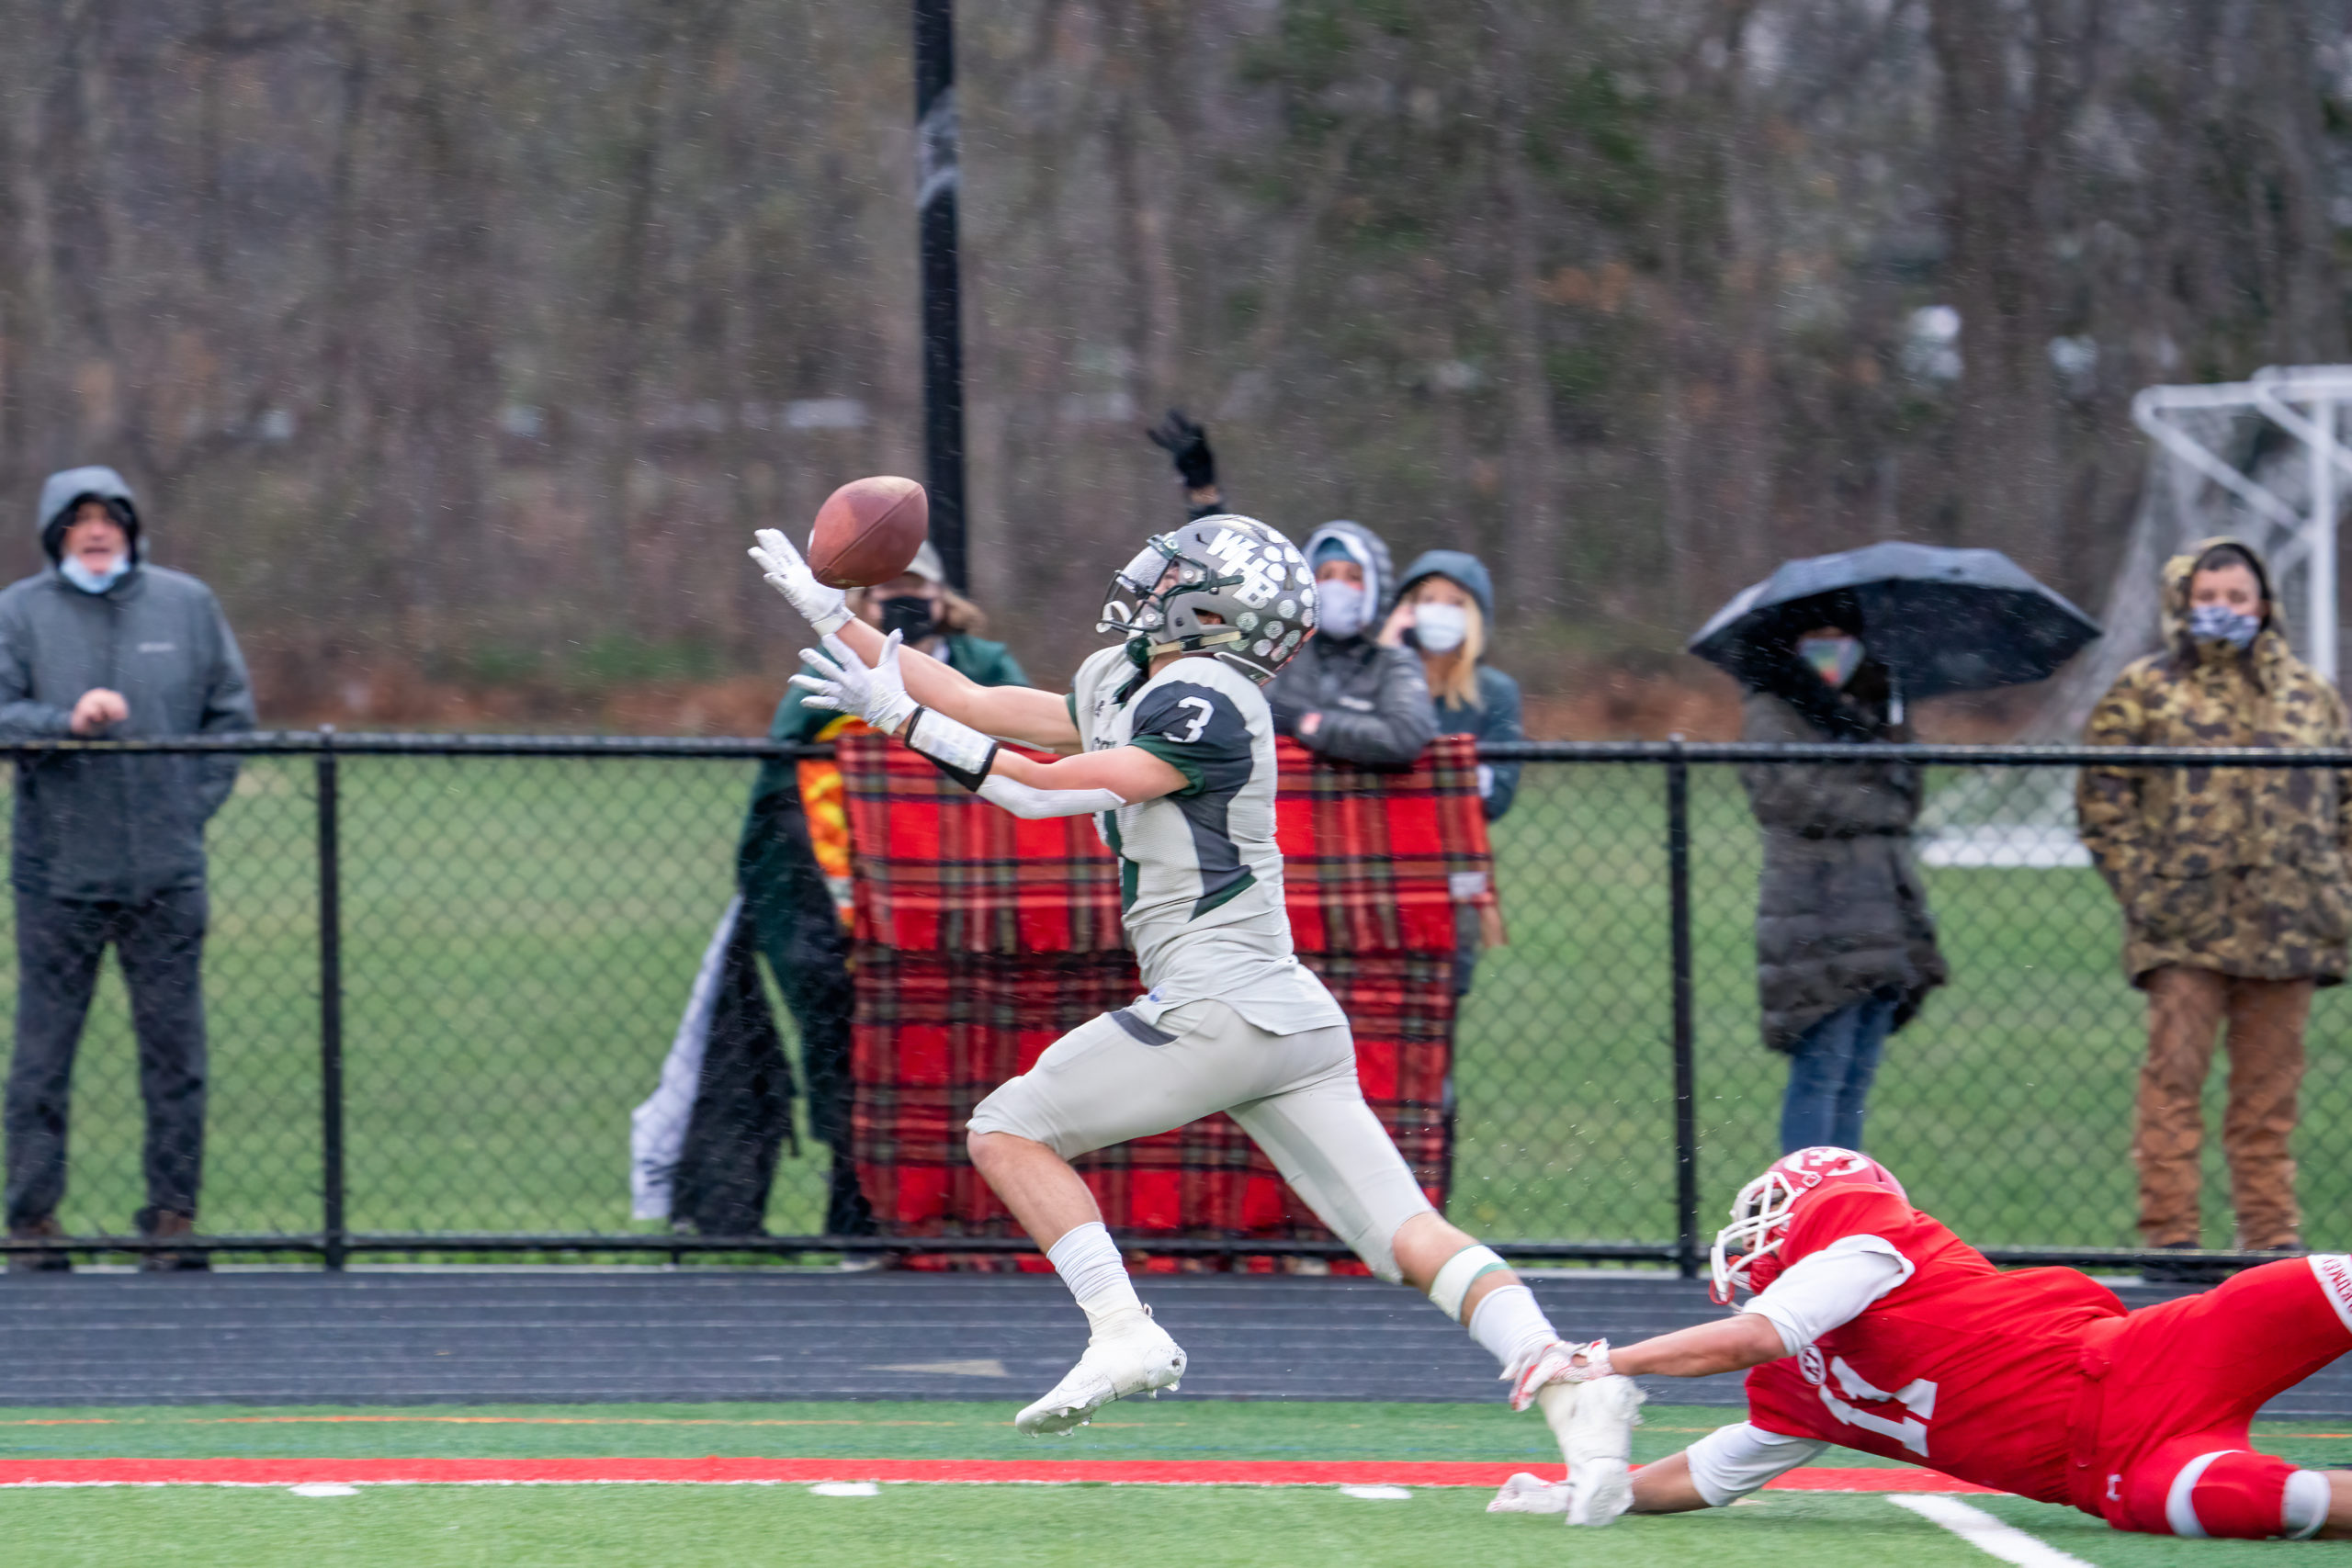 Owen Spizuoco catches a deep pass from quarterback Christian Capuano down the sideline, eludes an East Islip defender, and scurries into the end zone to pull Westhampton Beach closer to East Islip's lead with just under a minute left in the first half.